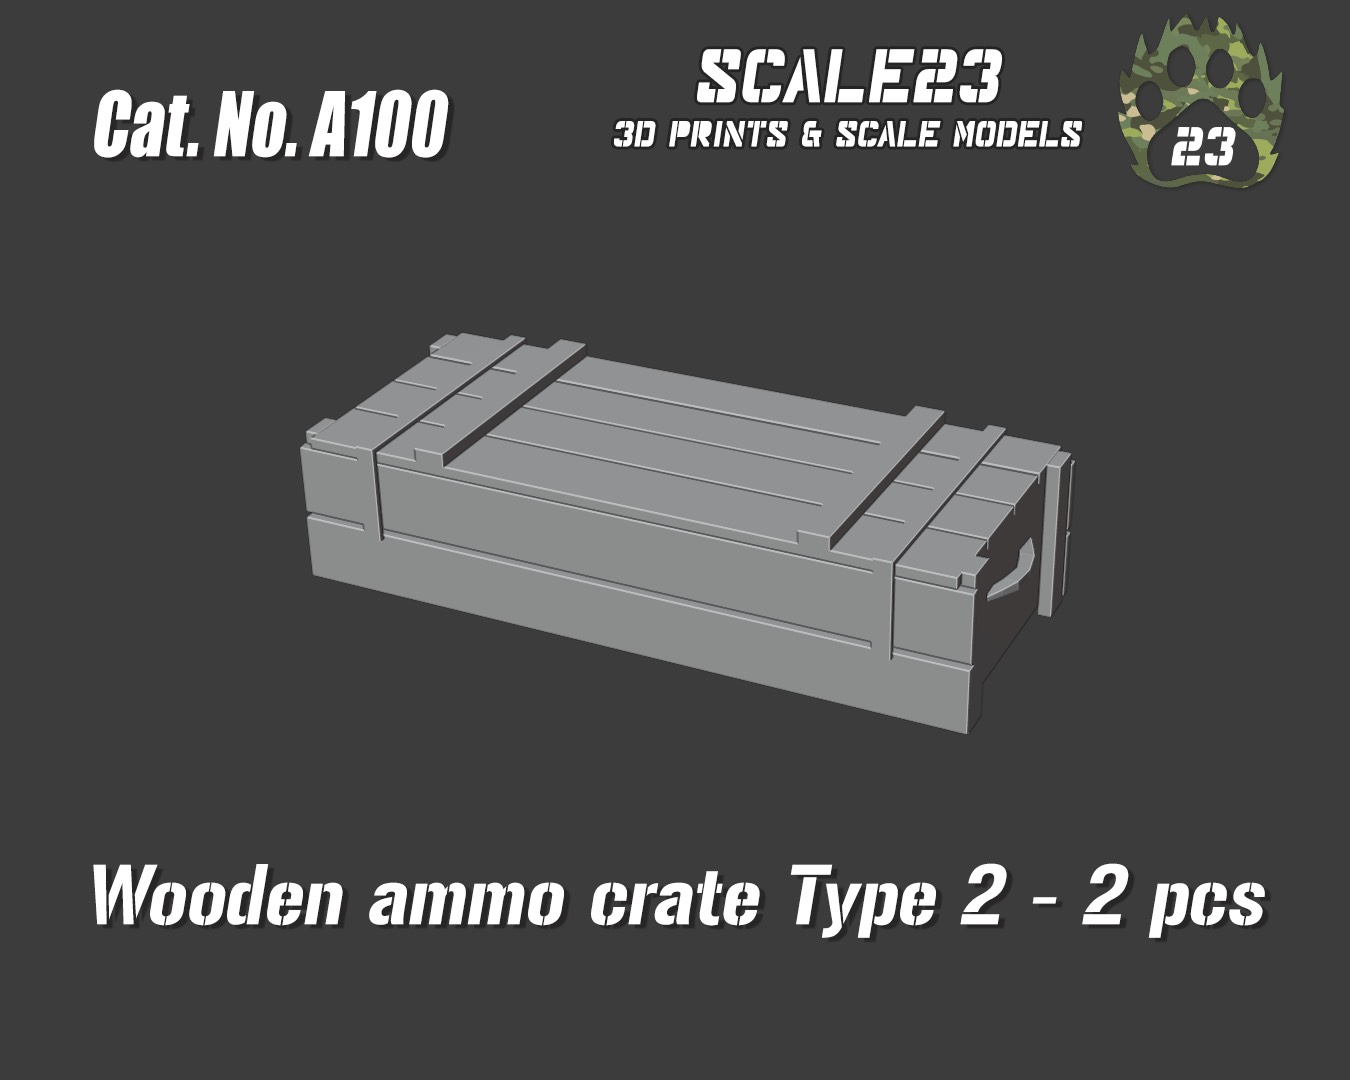 Wooden ammo crate - type 2 (2pc)